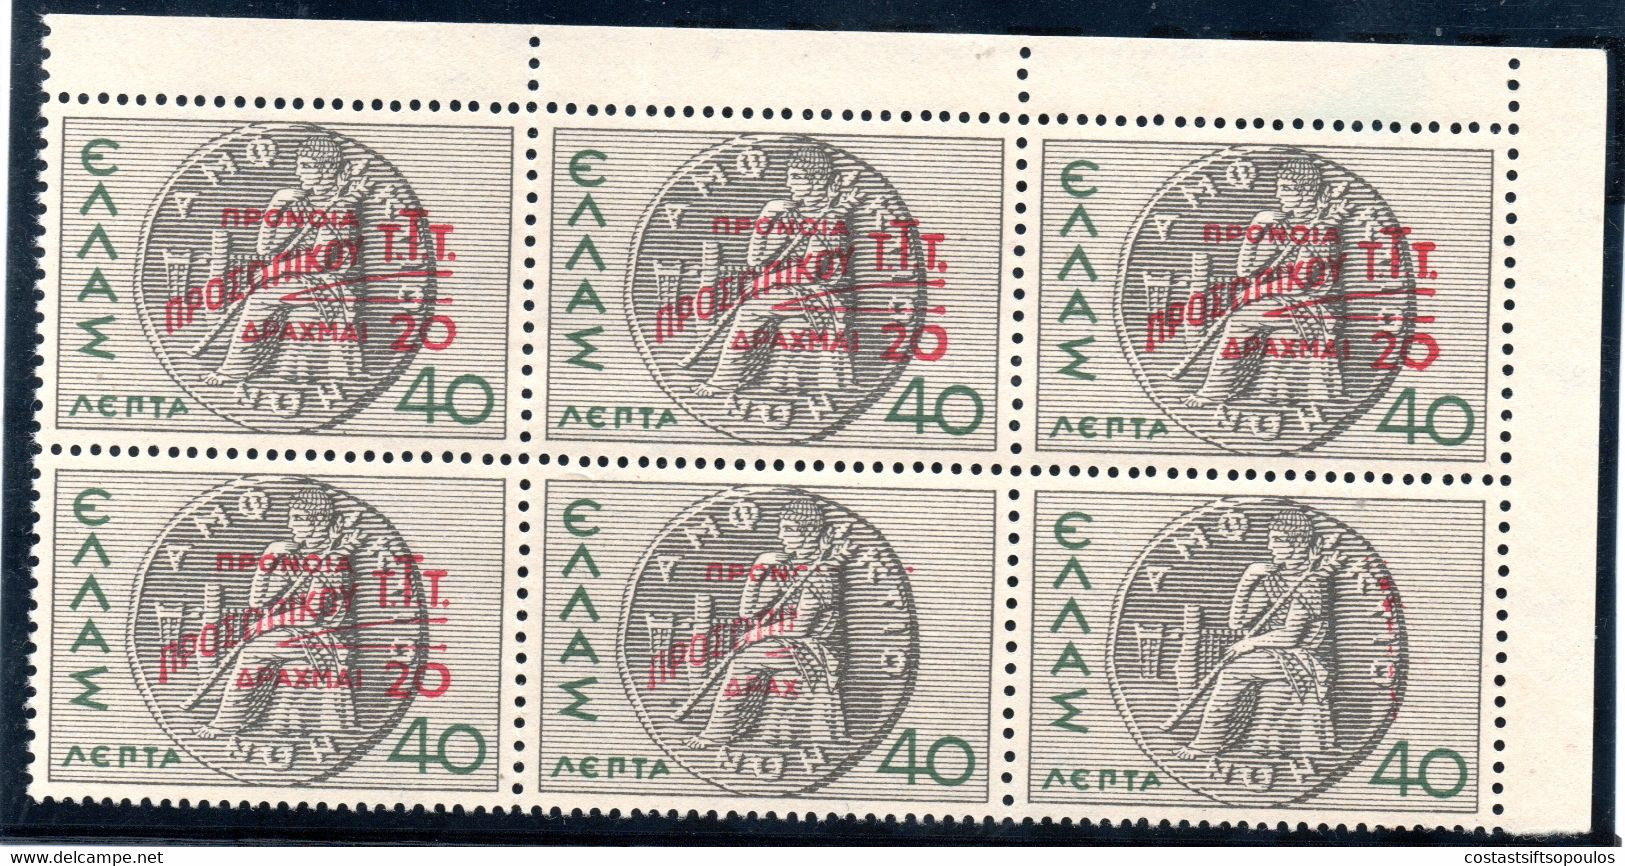 926.GREECE.1946 CHARITY COIN OF AMPHICTYONY HELLAS C96f MNH BLOCK OF 6 ONE WITHOUT OVERPR.VERY SCARCE - Errors, Freaks & Oddities (EFO)